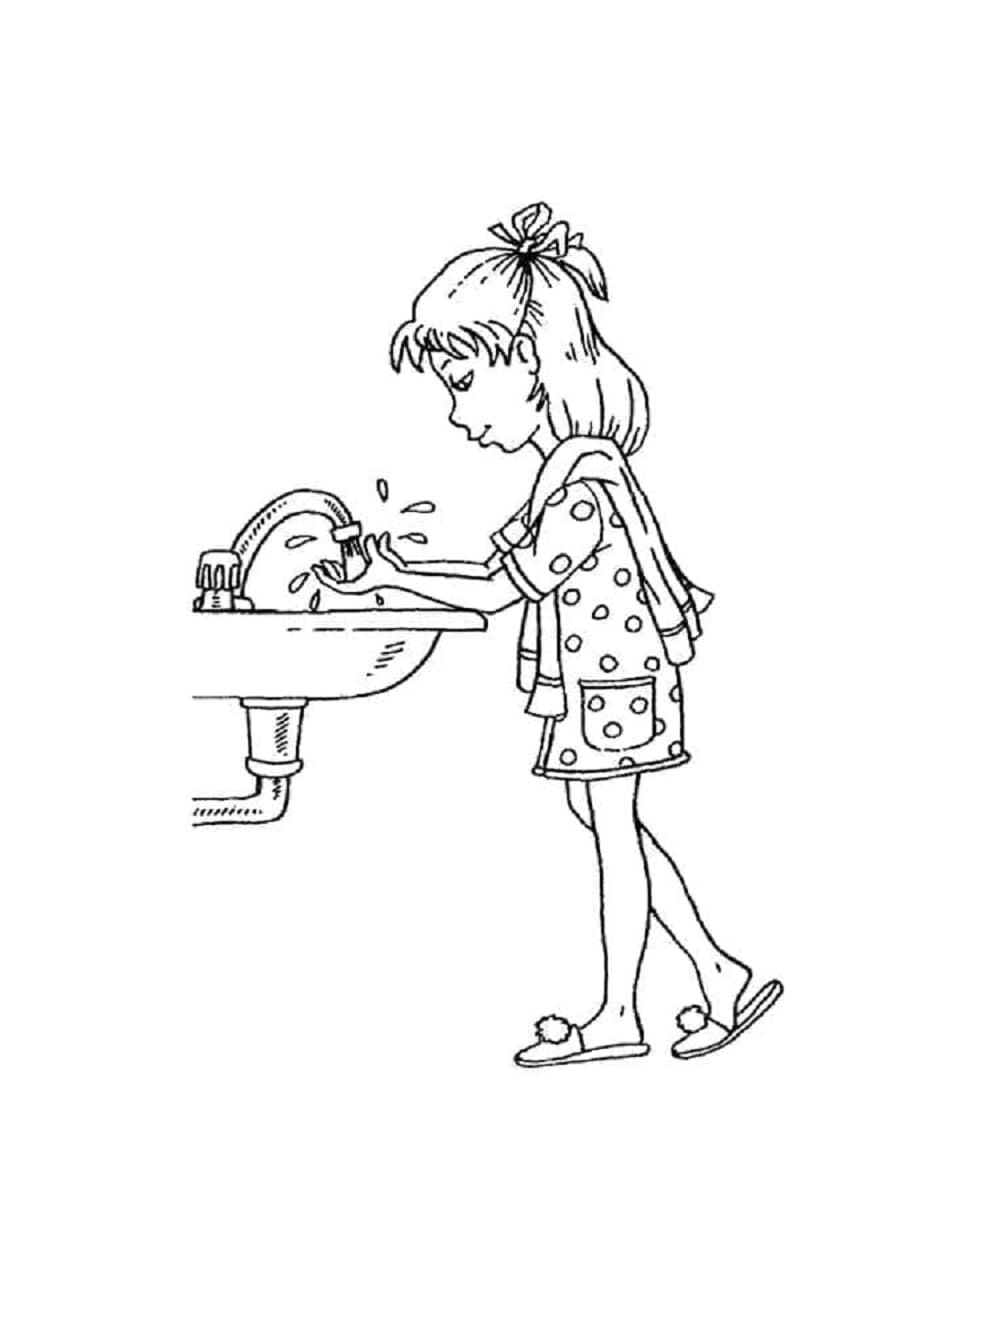 Printable Hygiene Picture Free Coloring Page